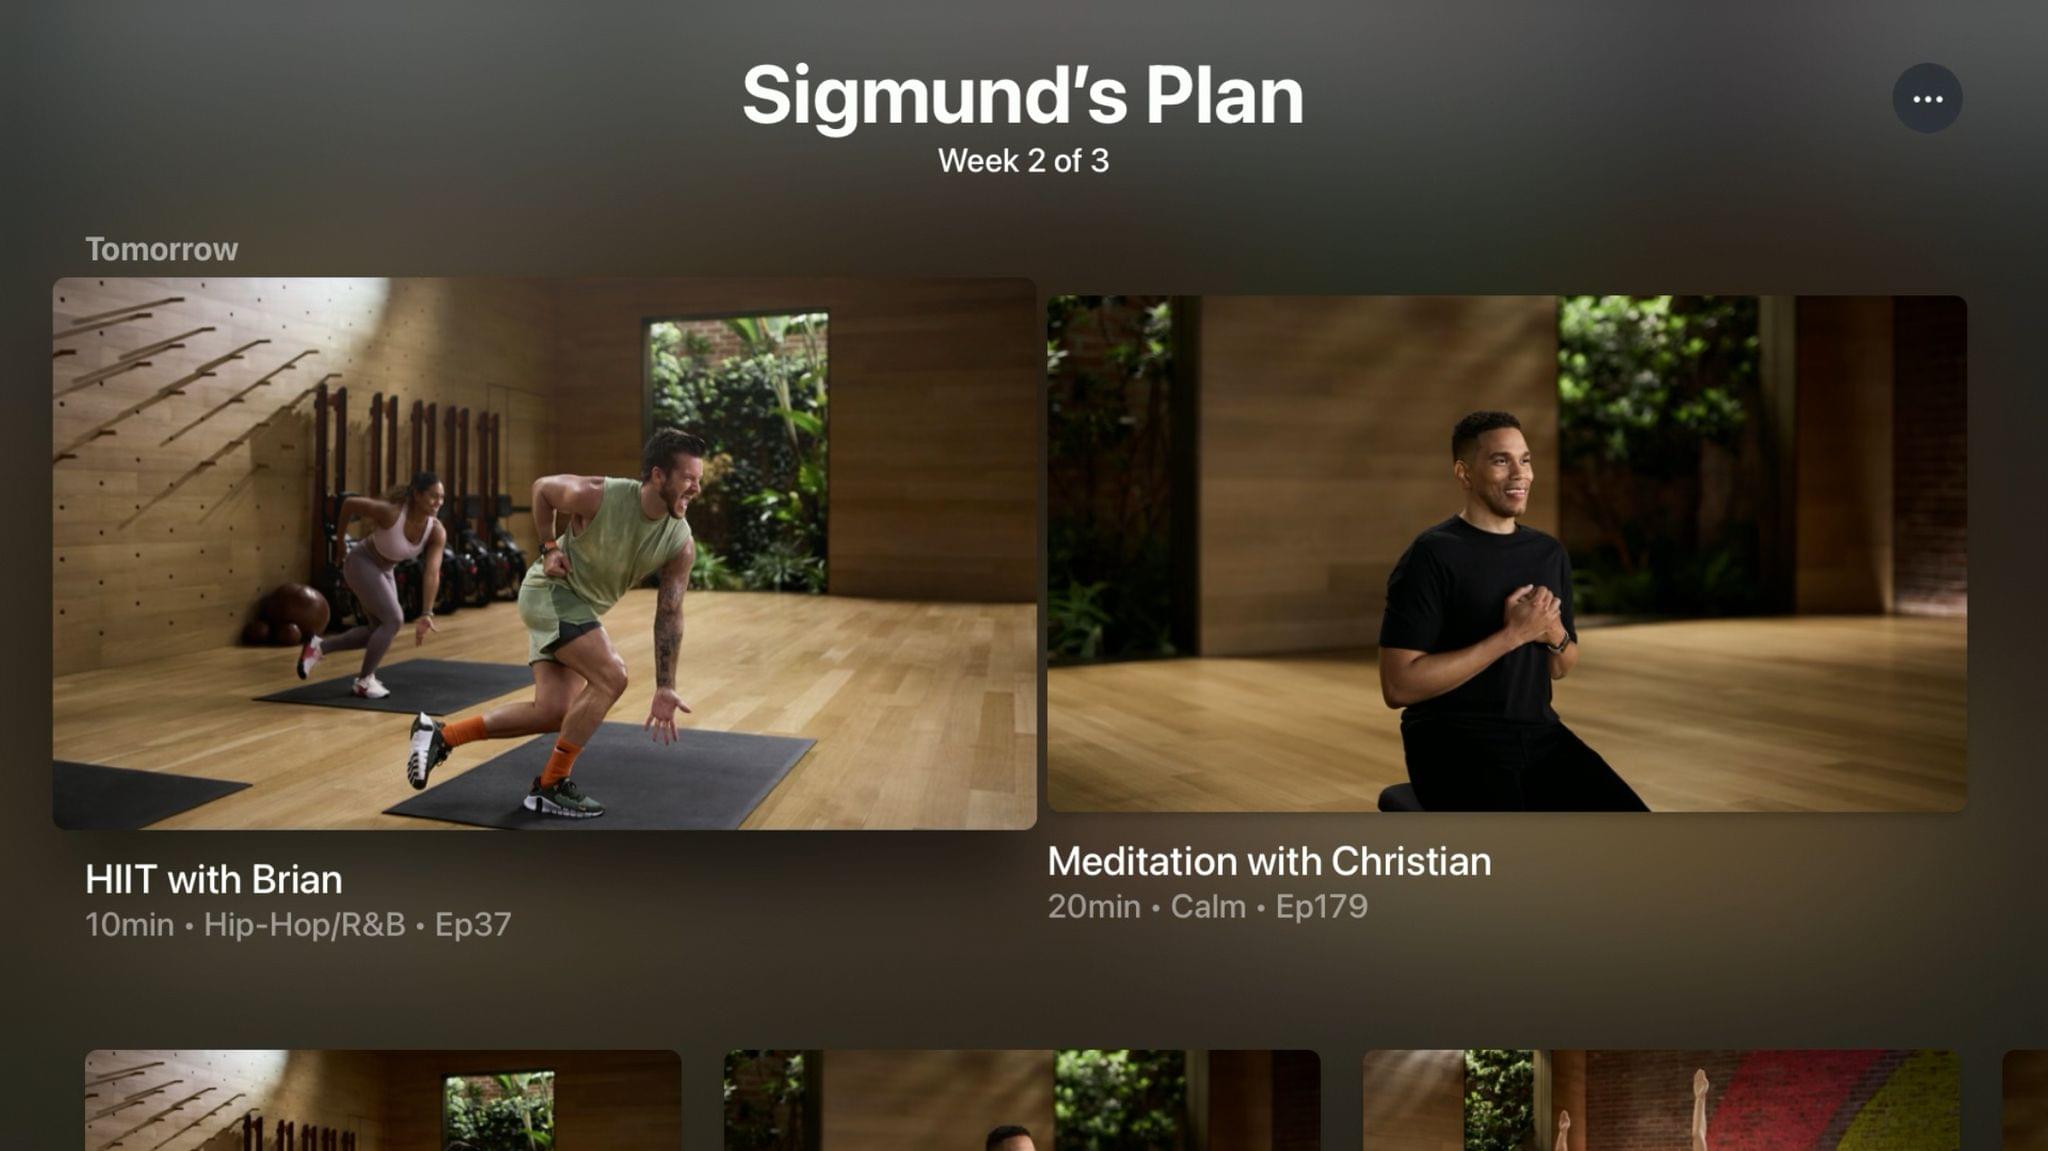 Once set up on iPhone, custom plans are ready to access in Fitness on Apple TV.